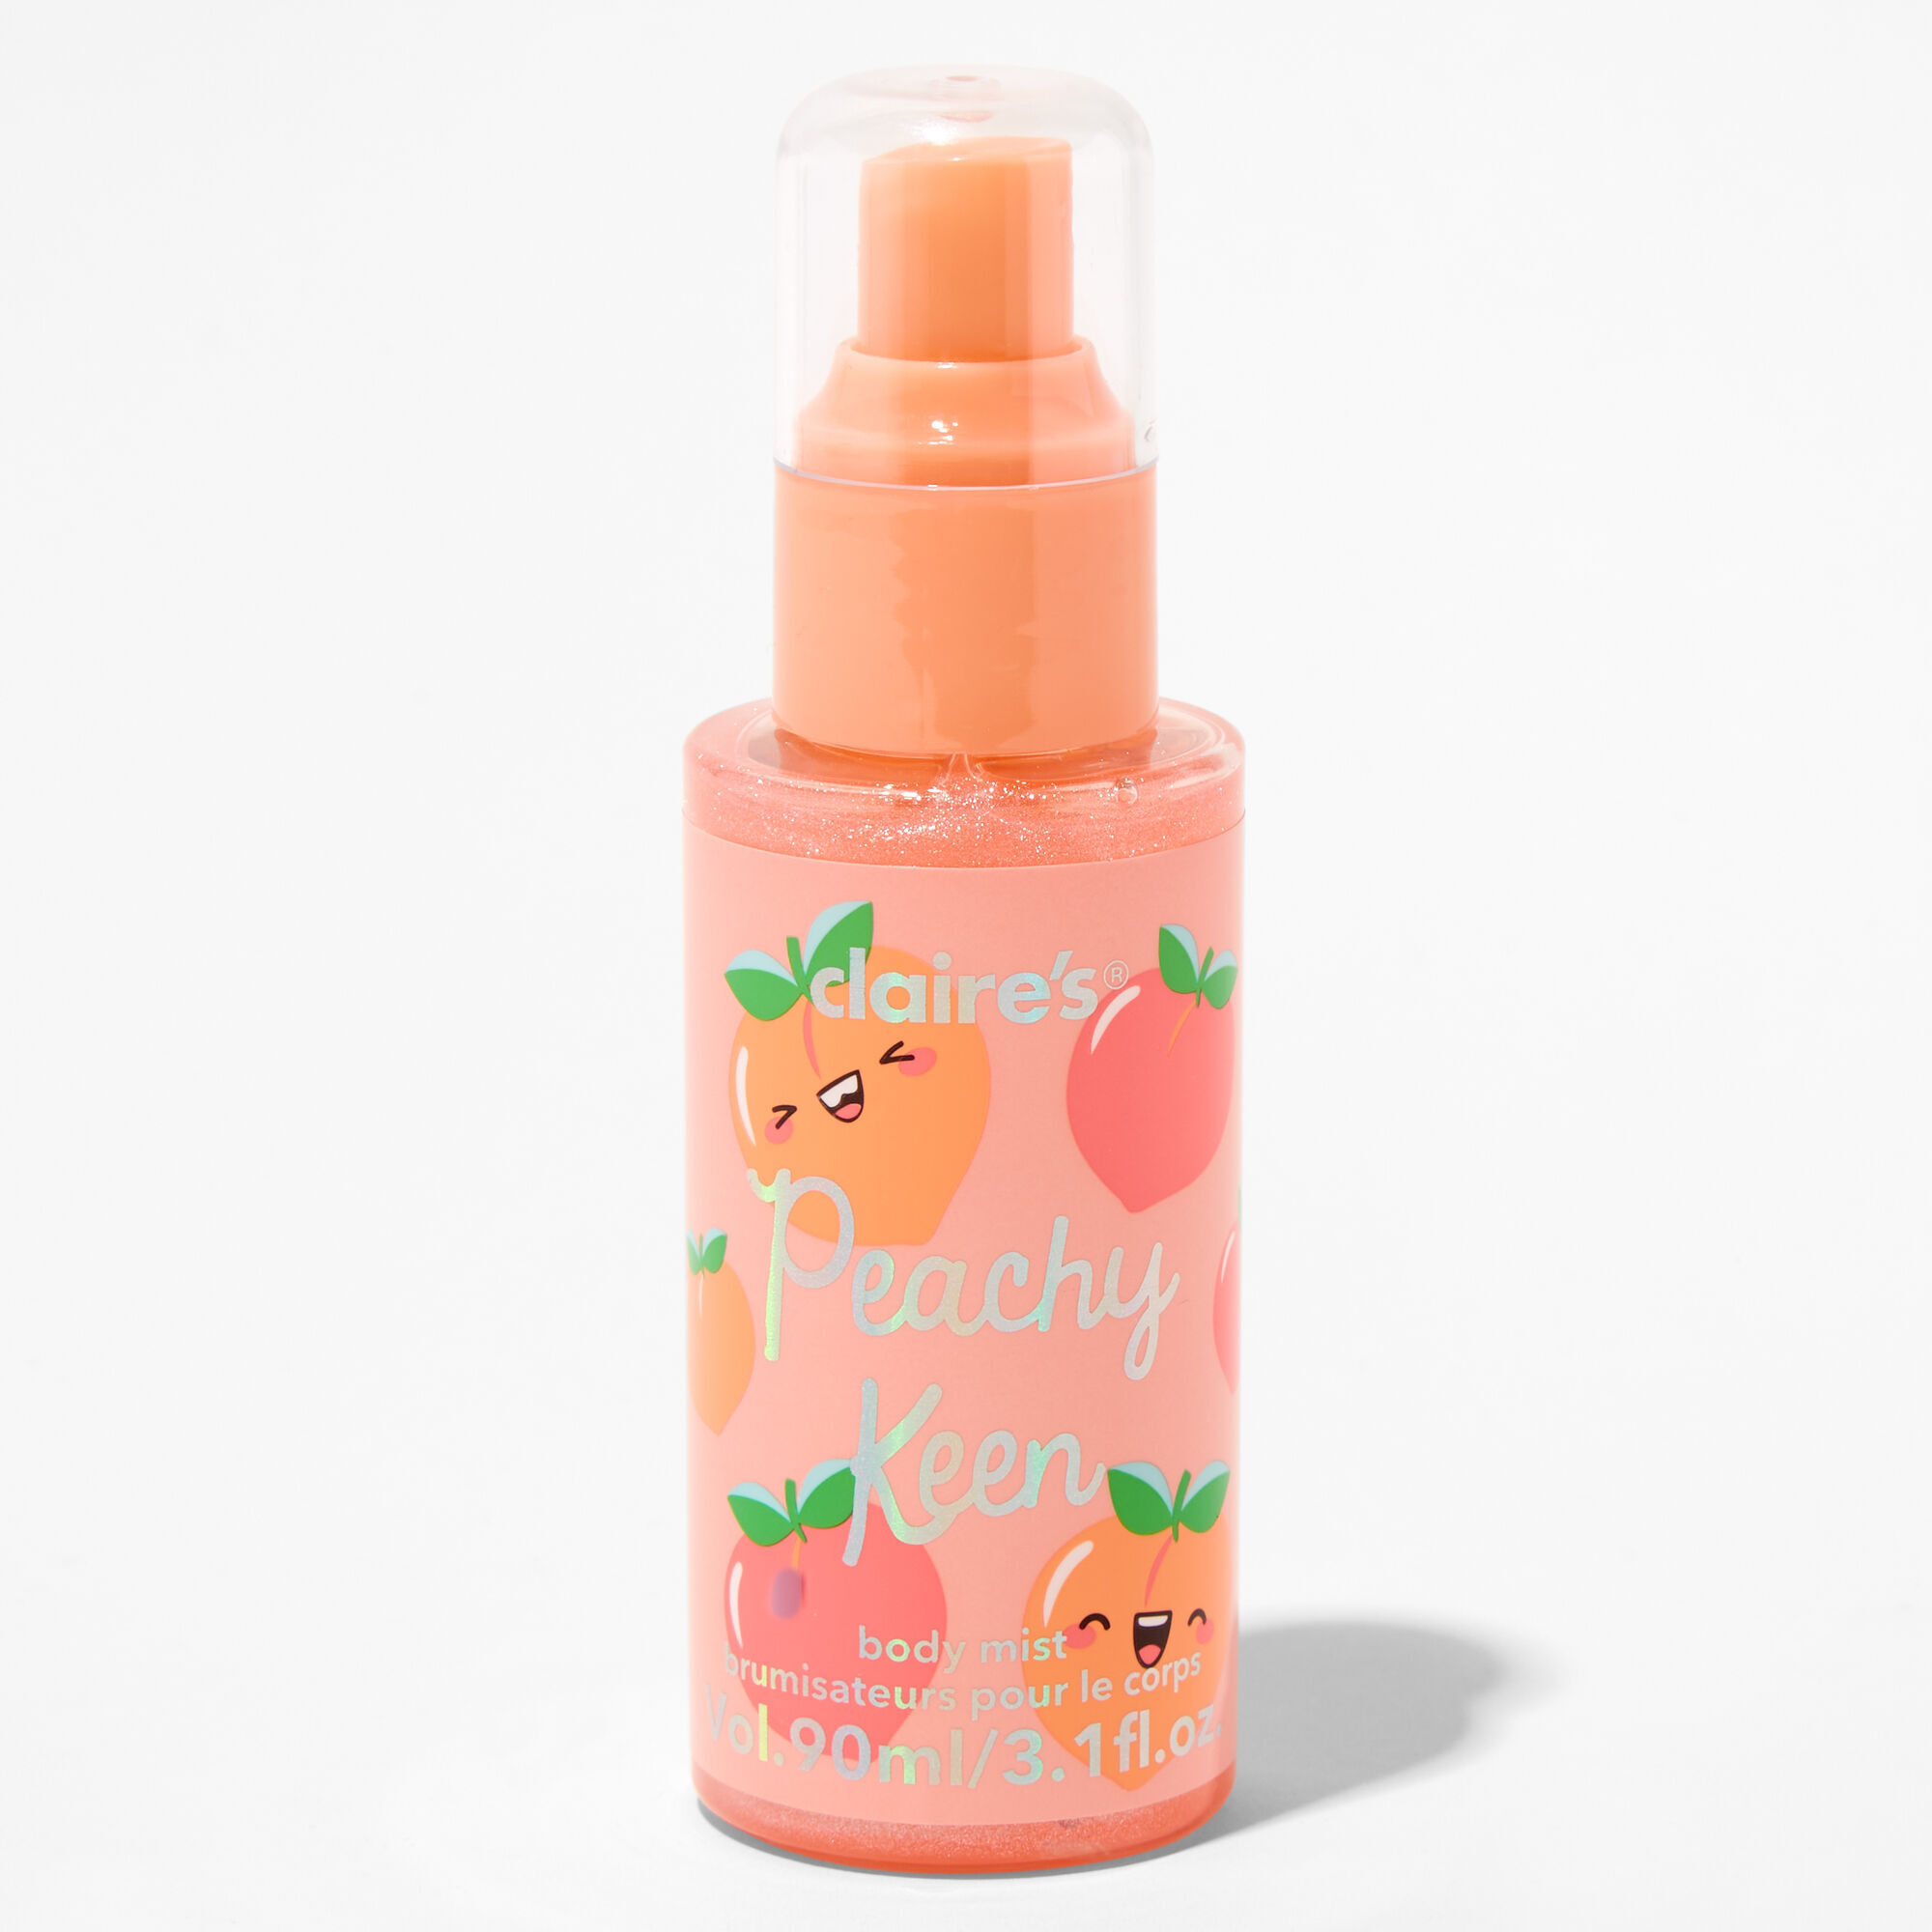 View Claires Peachy Keen Glitter Body Mist information